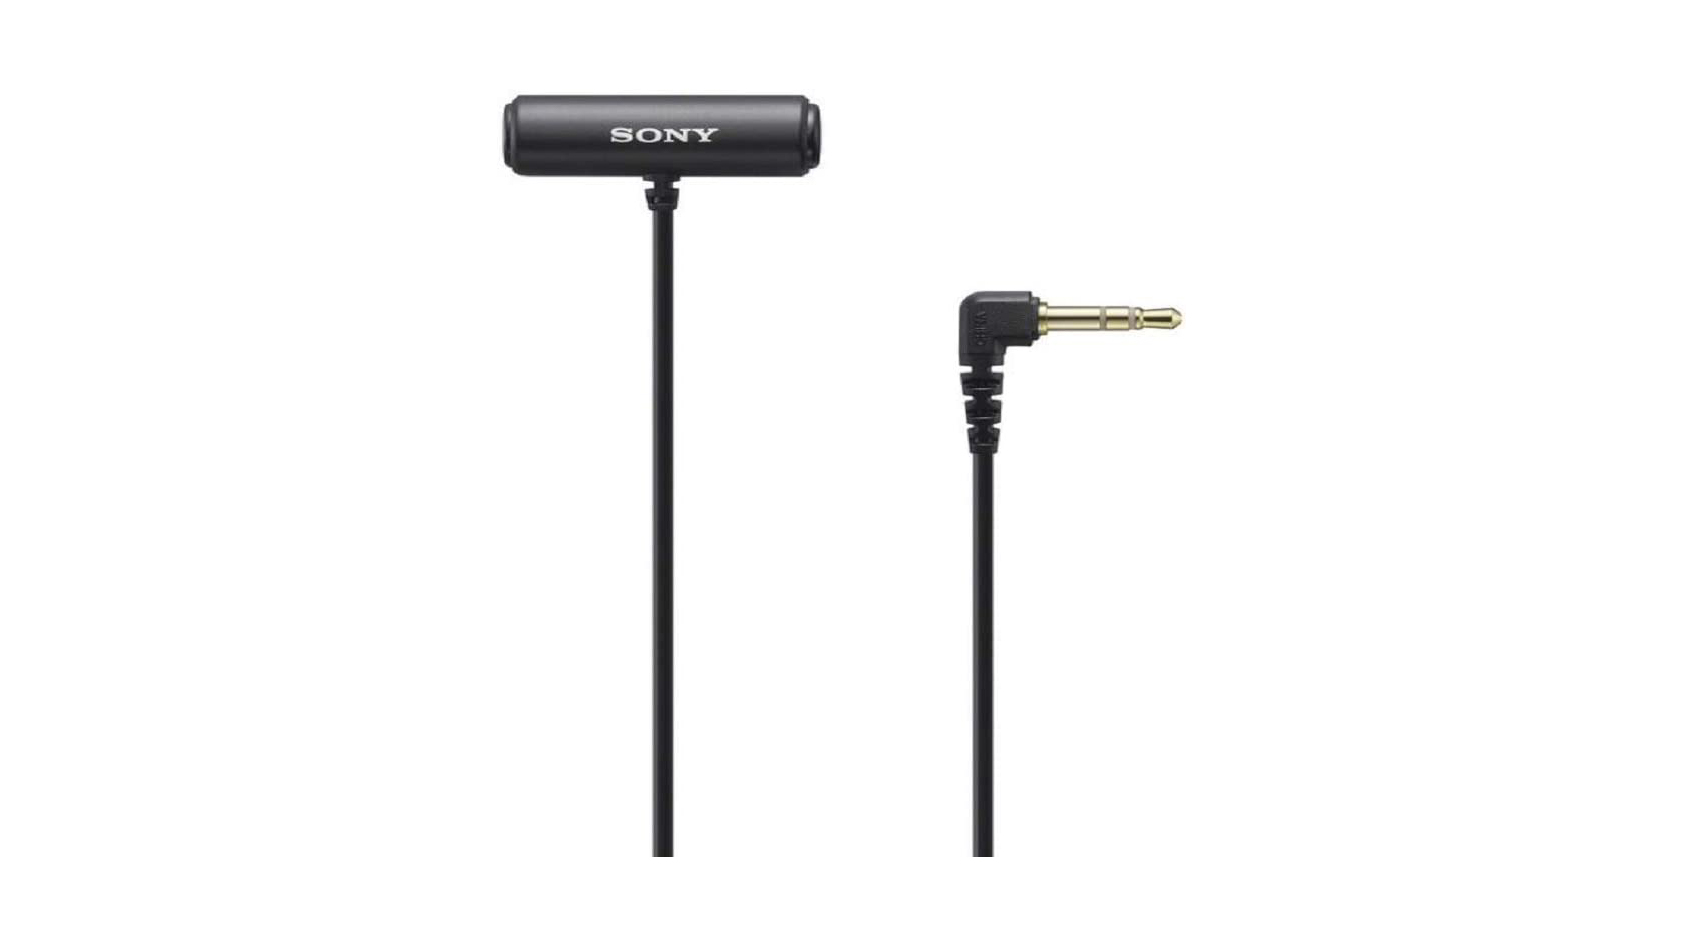  Shure MVL Lavalier Microphone for iPhone & Tablet - External  Clip On Mini Lapel Mic for Video Recording & Vlogging with 3.5mm Connector,  Windscreen, Mount & Carrying Pouch : Musical Instruments